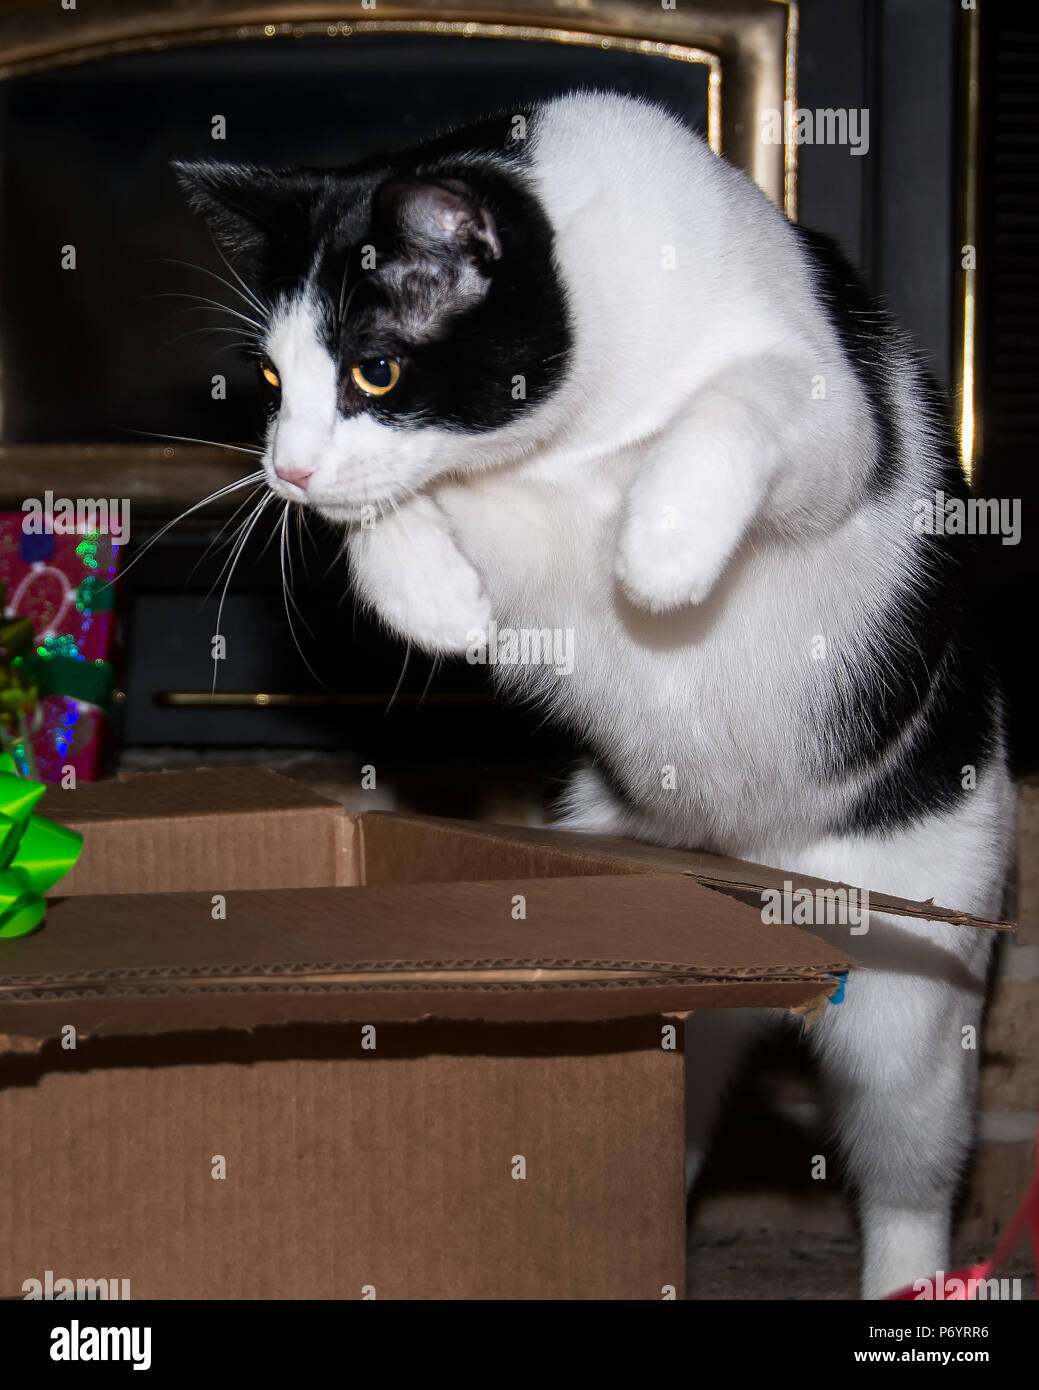 Black and white cat playing by jumping into an empty box at Christmas time. Stock Photo